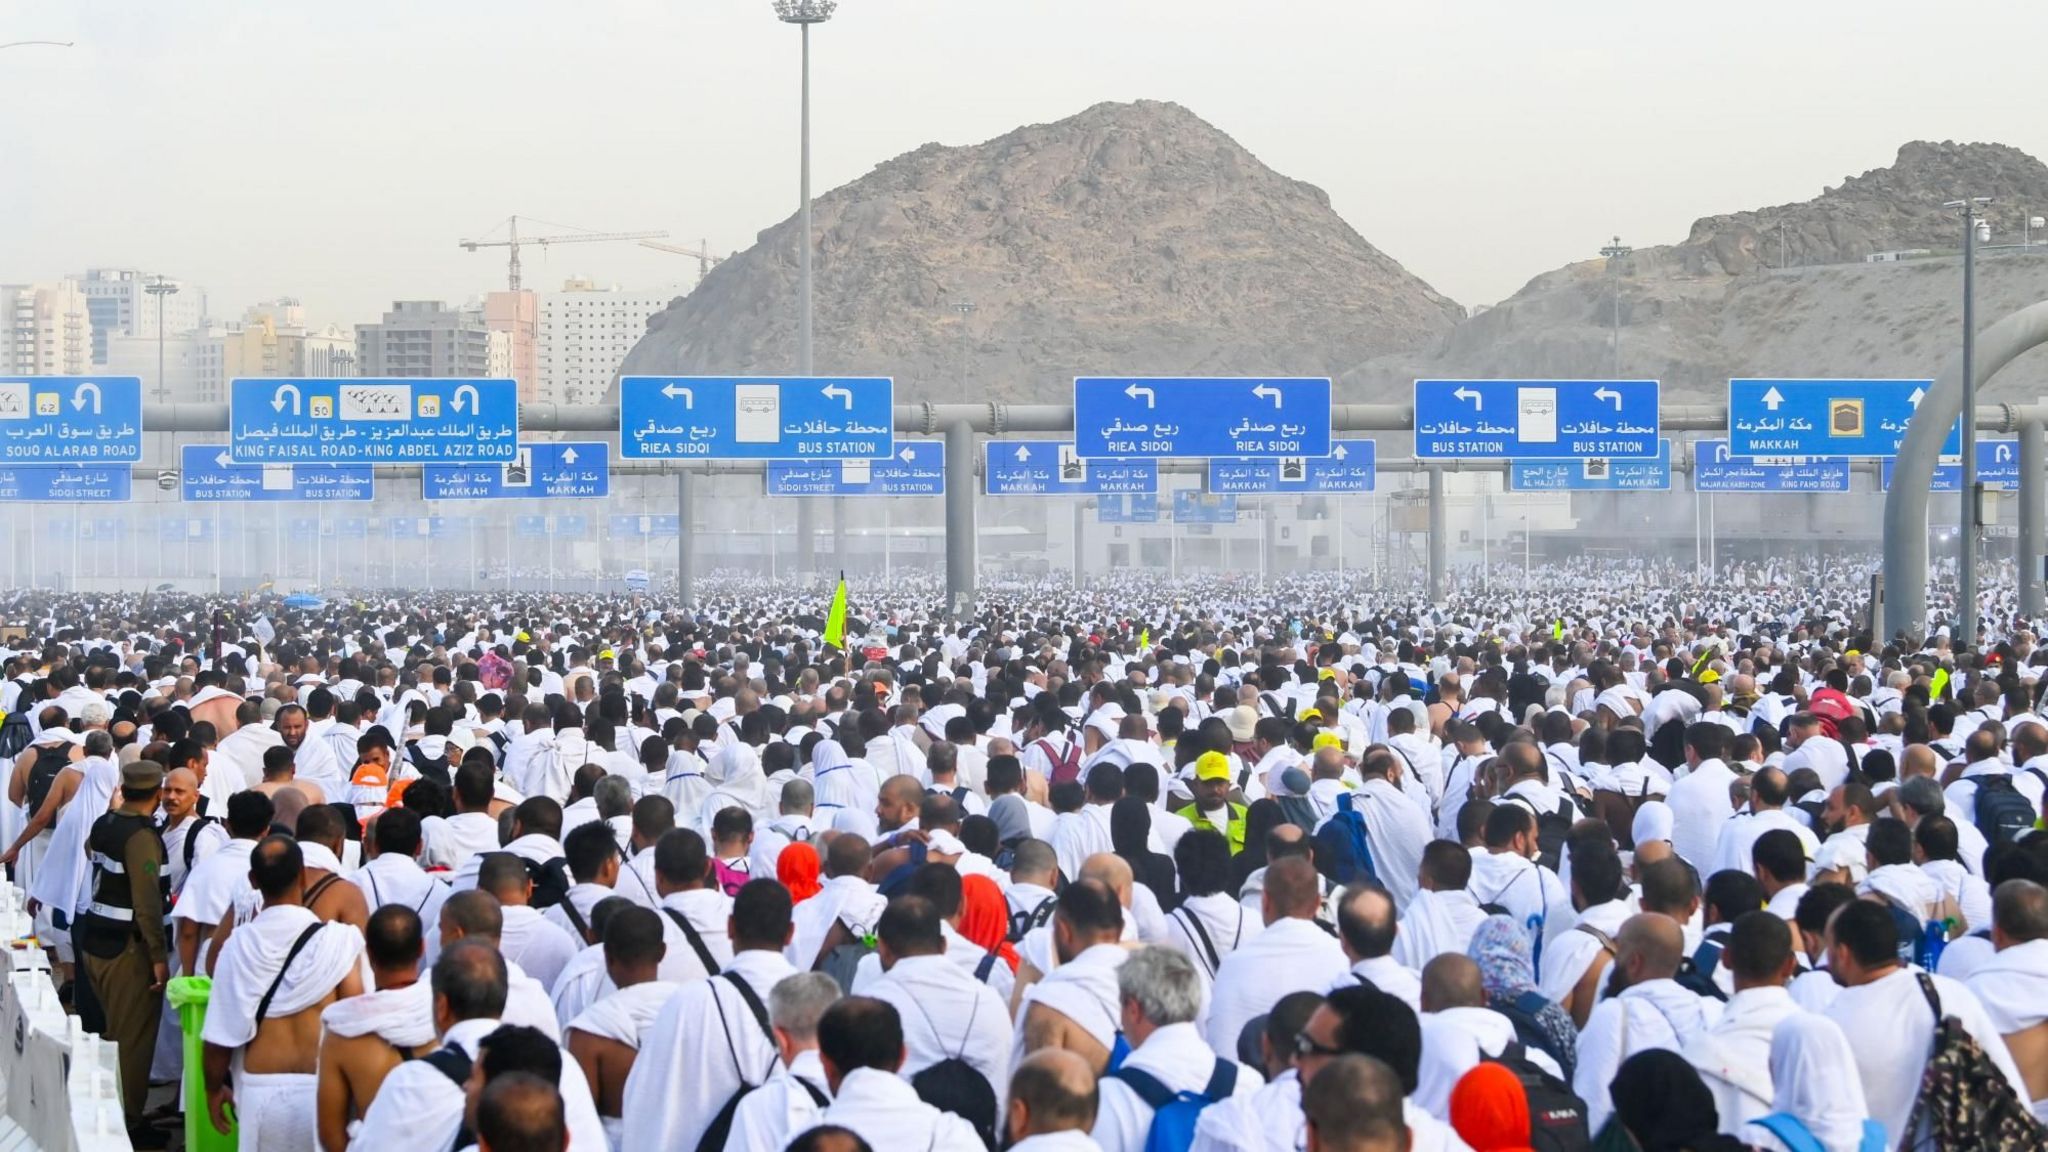 Crowd of pilgrims in white clothing on a road near Mecca